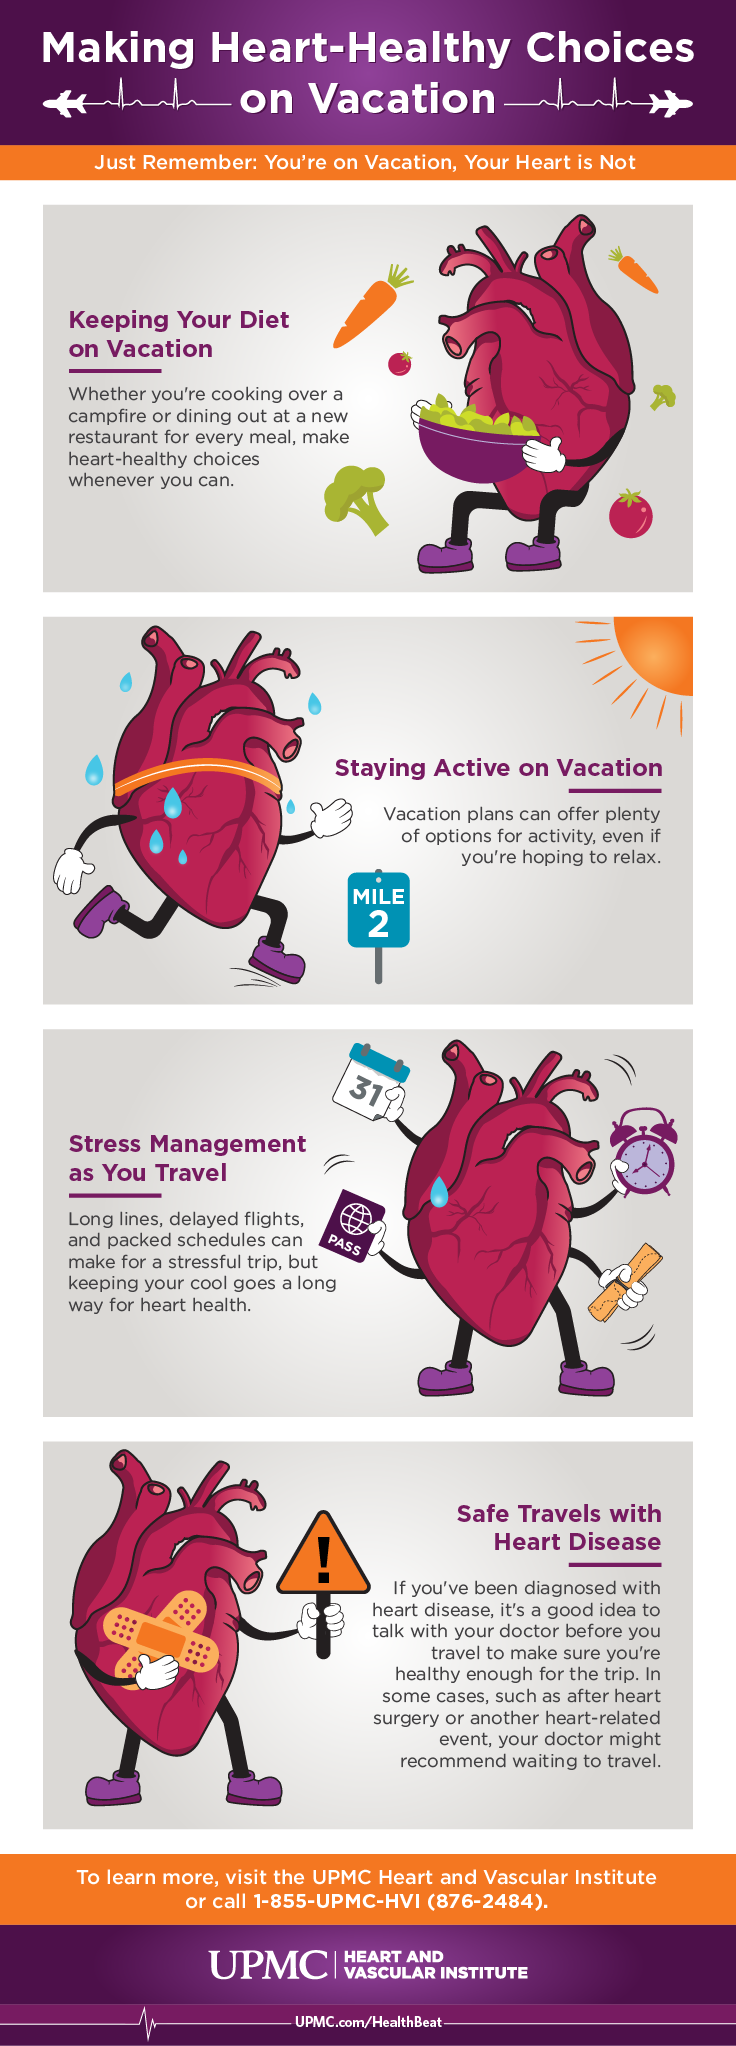 Learn more about staying heart healthy on vacation